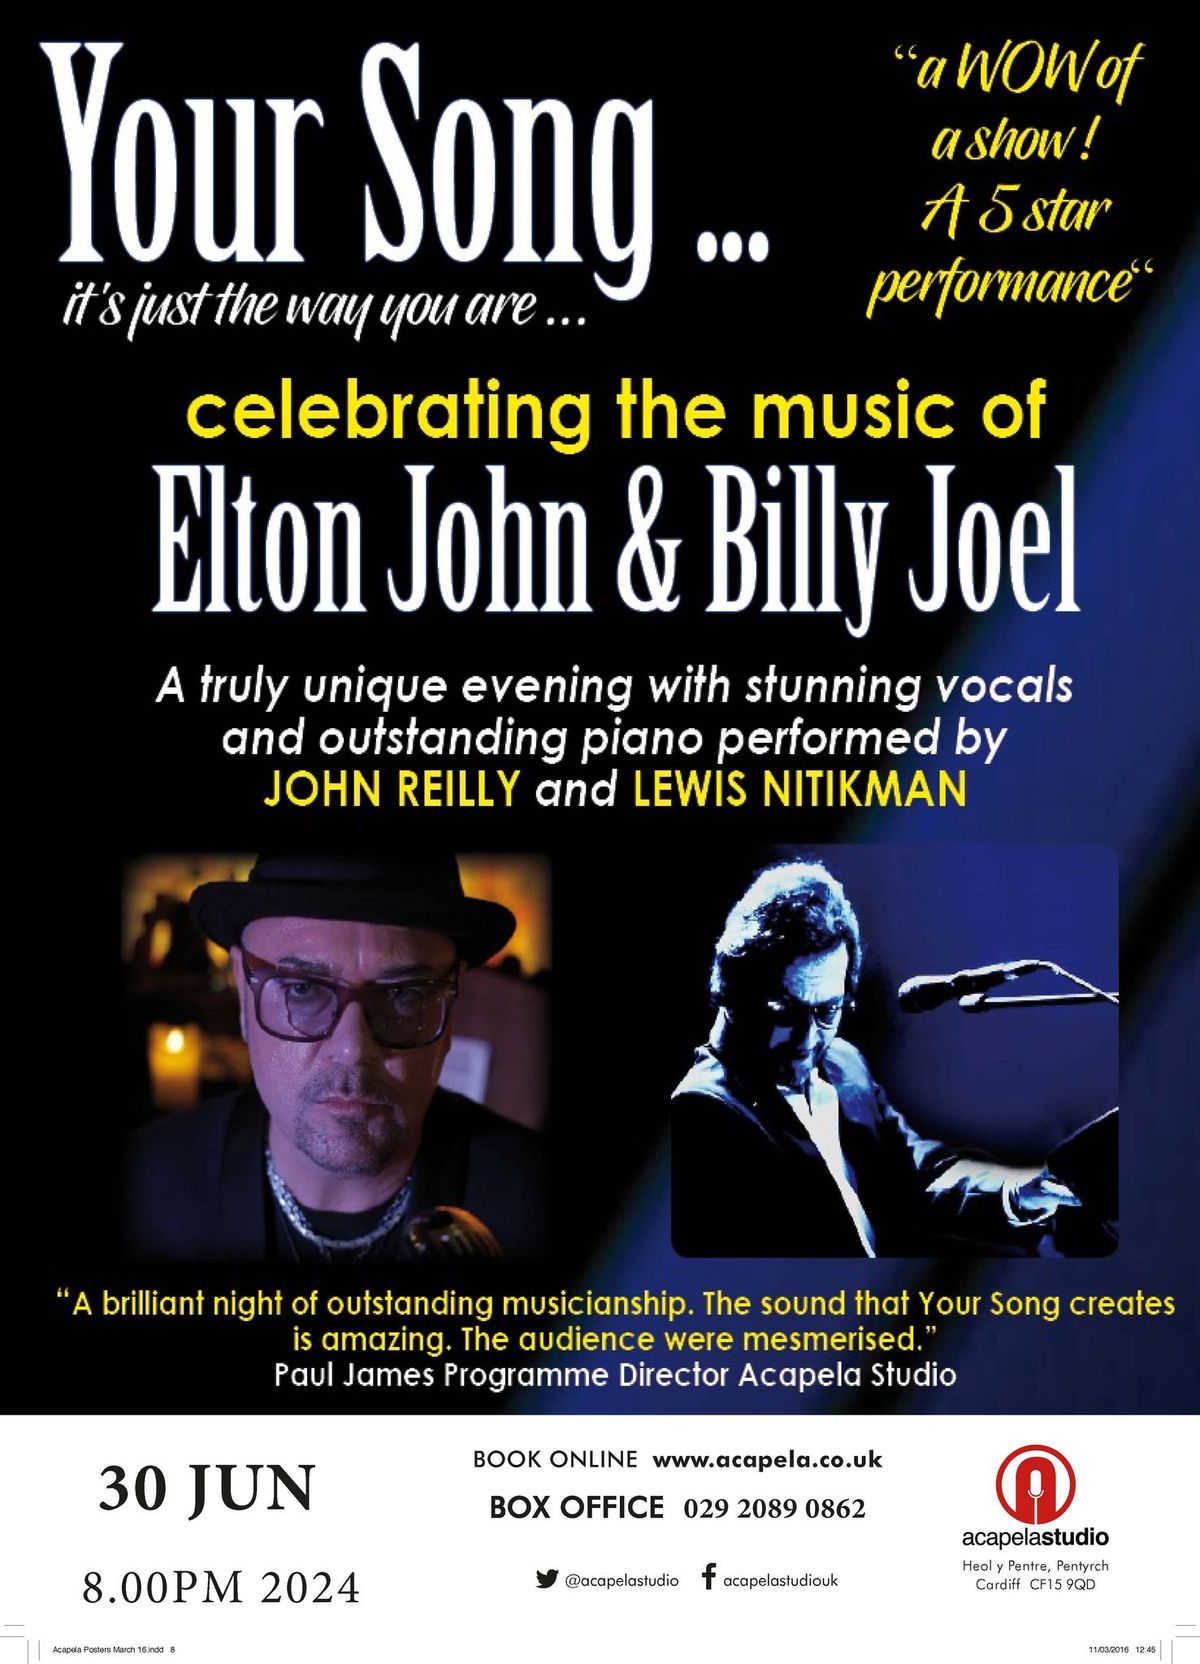 Your Song \u2013 A Celebration of the Songs of Elton John and Billy Joel